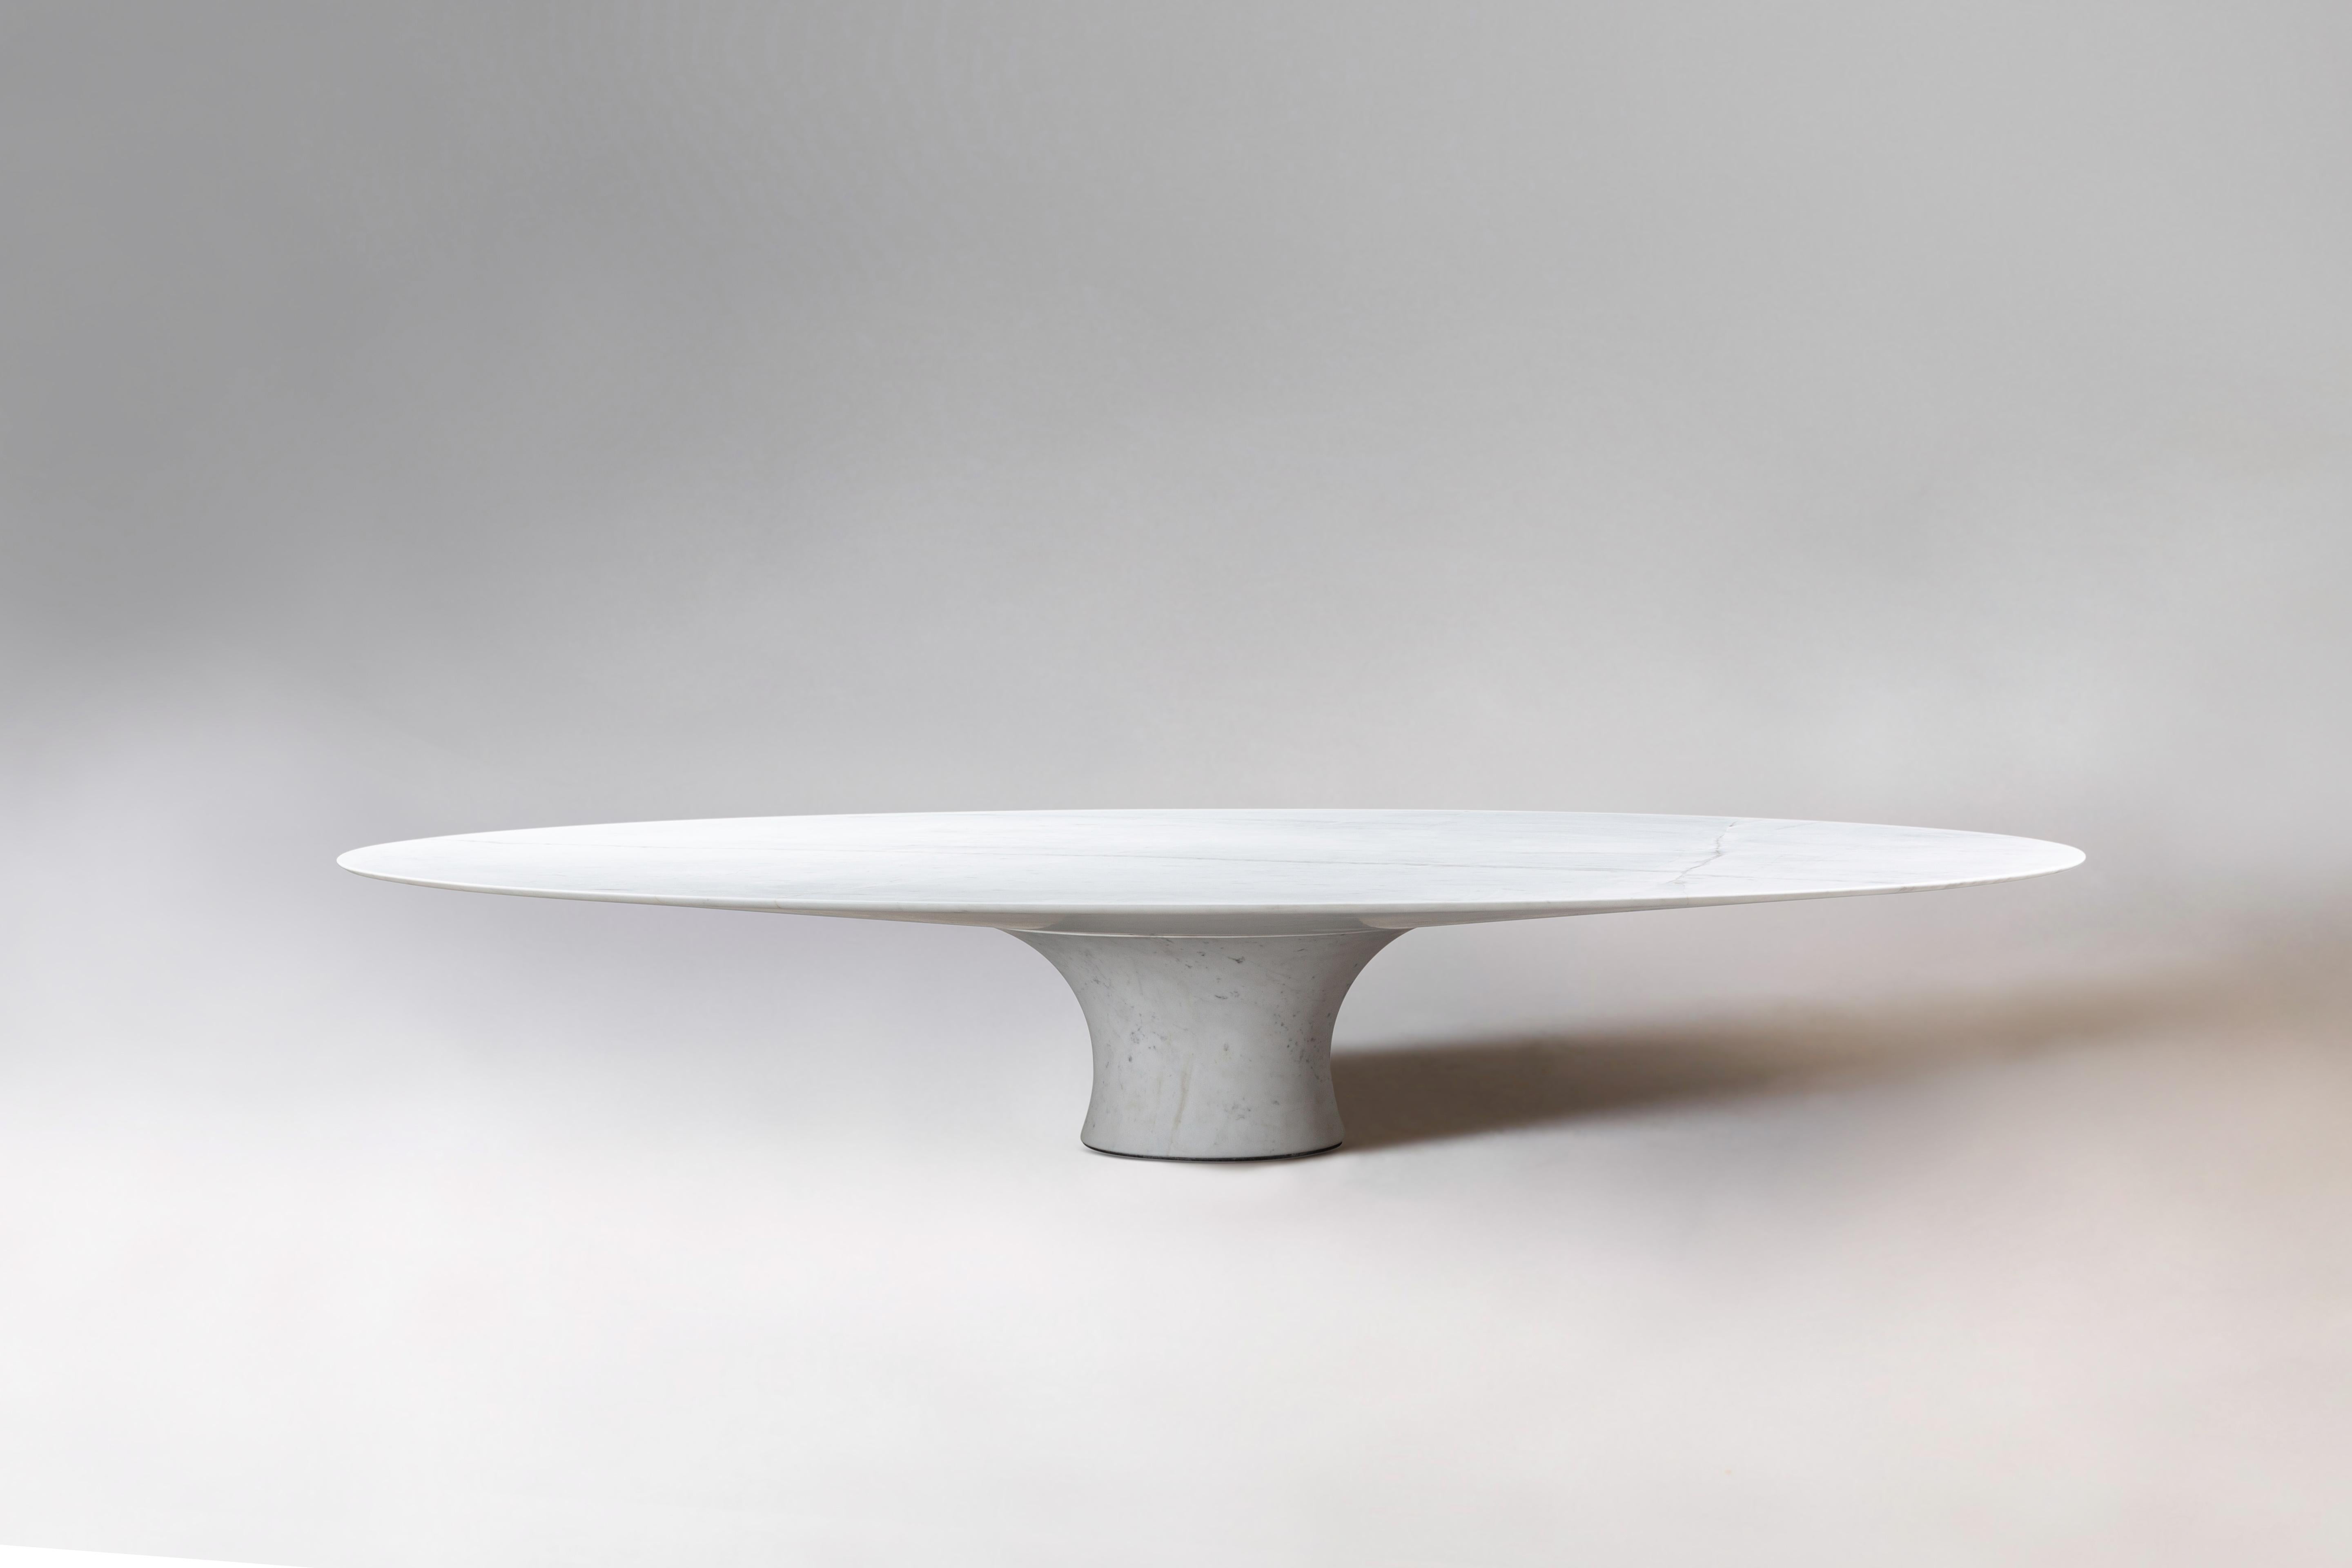 Kyknos Refined Contemporary Marble Oval Table 210 / 75
Dimensions: 210 x 75 cm
Materials: Kynos marble

Angelo is the essence of a round table in natural stone, a sculptural shape in robust material with elegant lines and refined finishes.

The